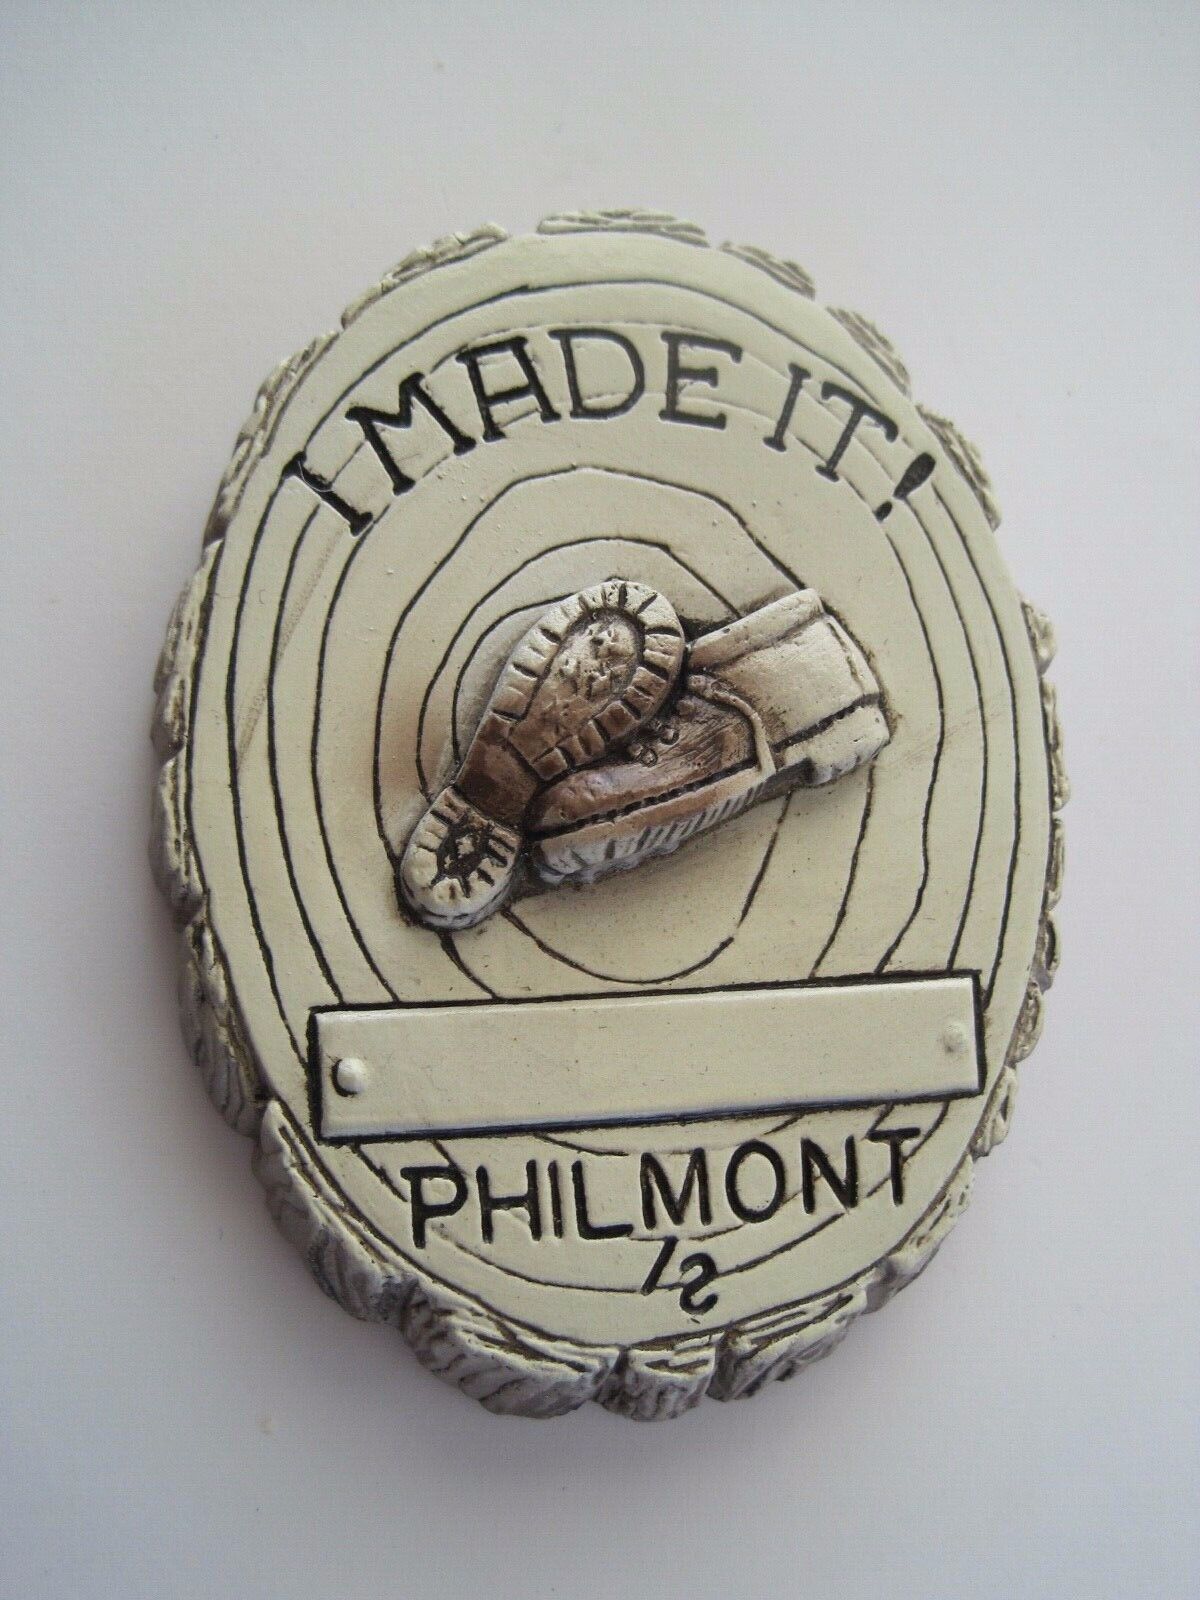 Philmont Ceramic Wall Hanging I MADE IT BOOT 3\